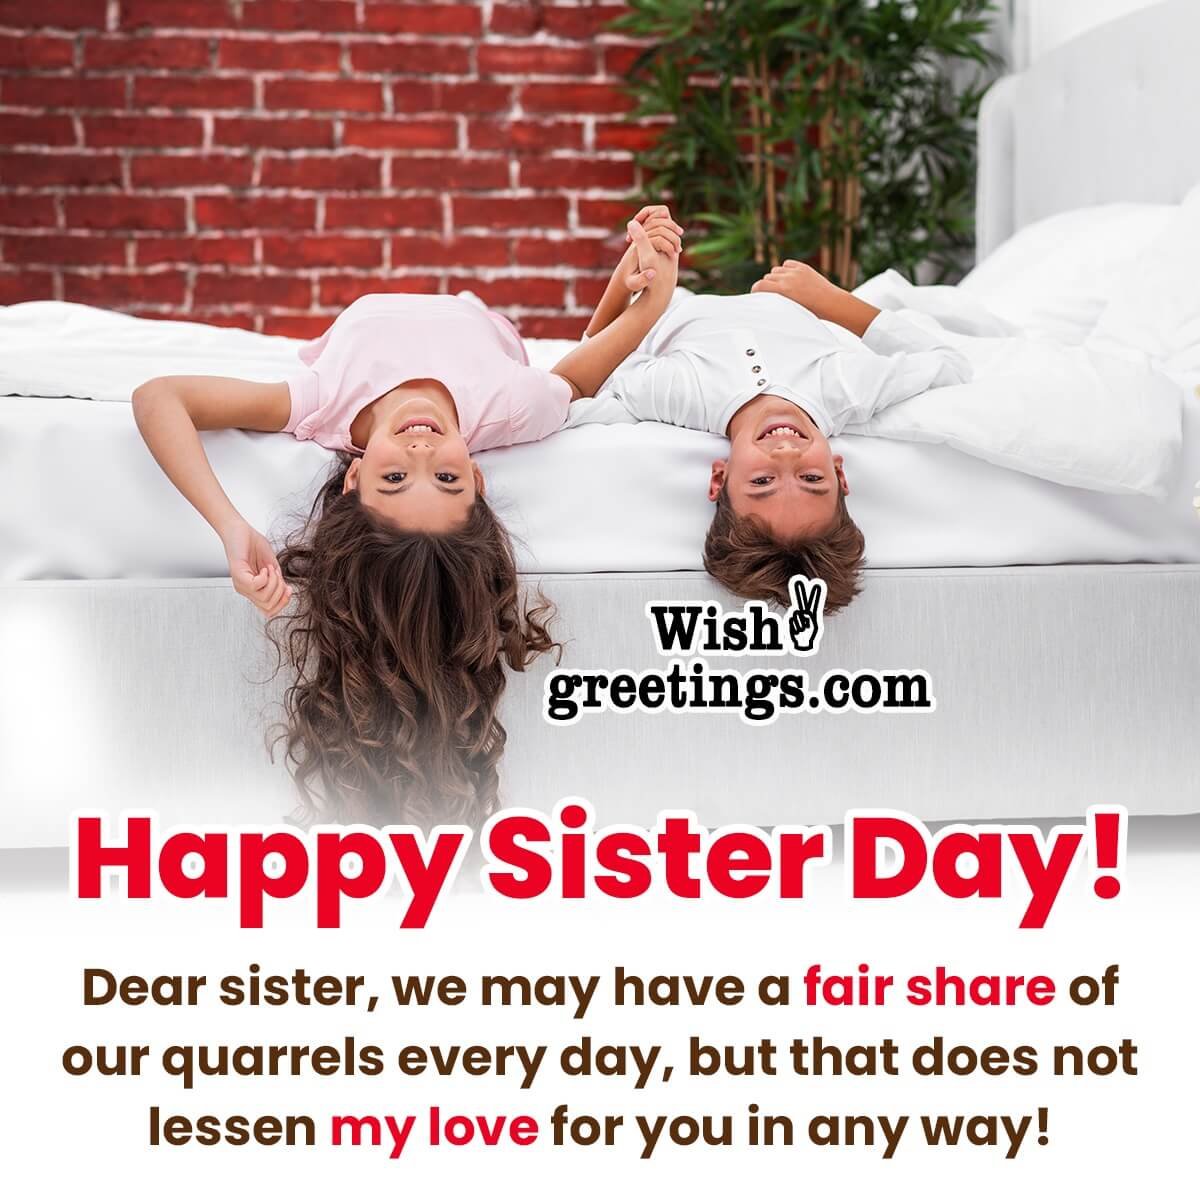 Sister’s Day Message From Brother